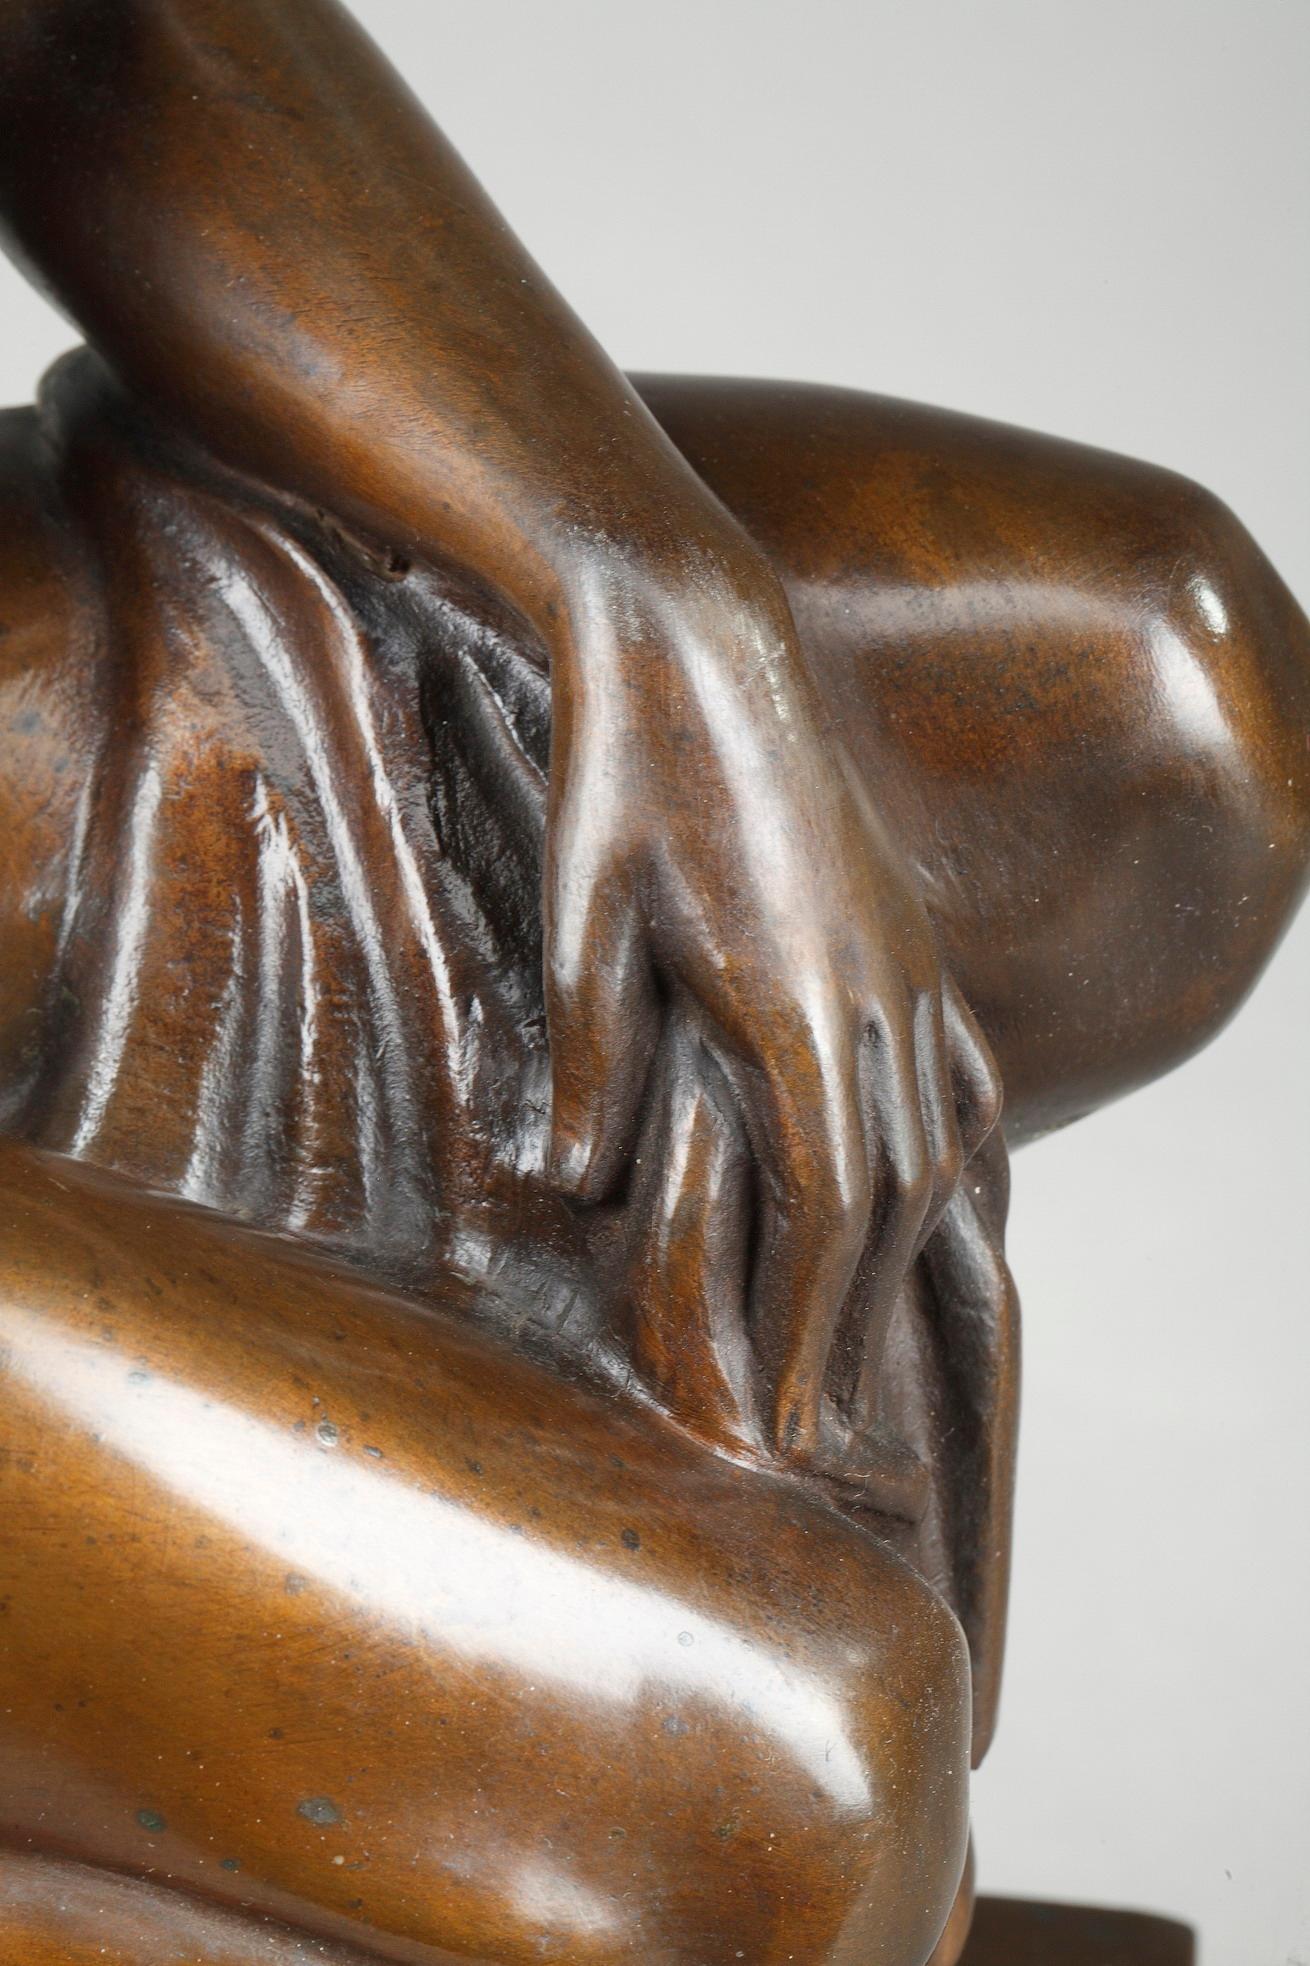 Art Deco sculpture crafted of bronze with brown patina, depicting a nude crouched woman holding a drapery. The figure is resting on a red and beige marble plinth. The bronze is marked FZP and dated 1921. Rectangular stamp, marked: Kunstanstalt WMF